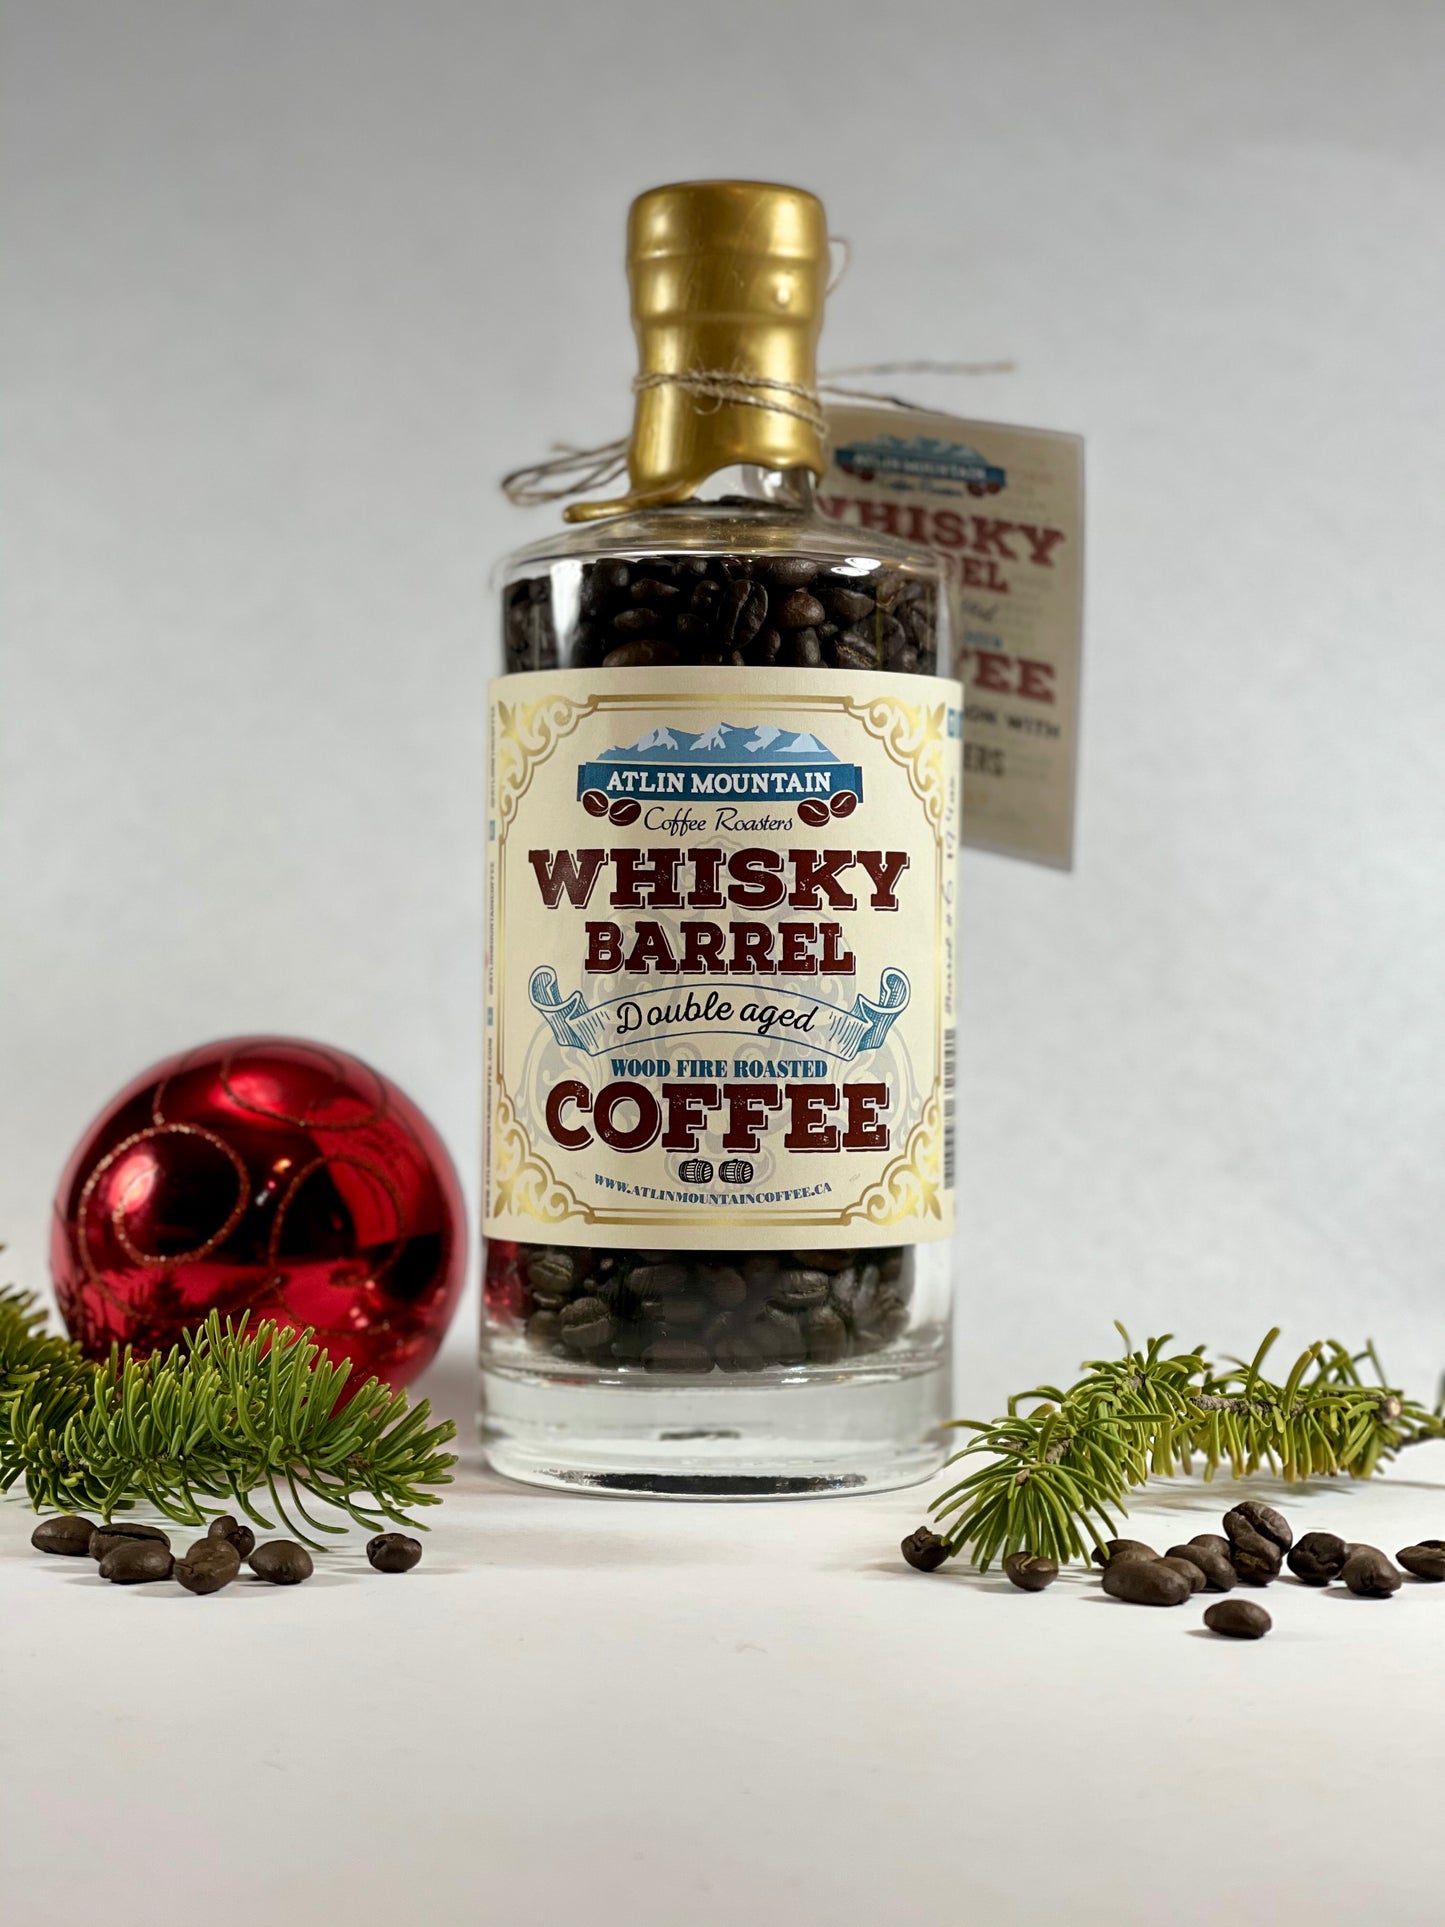 Whisky barrel aged coffee beans- NEW double aged recipe. Certified organic.